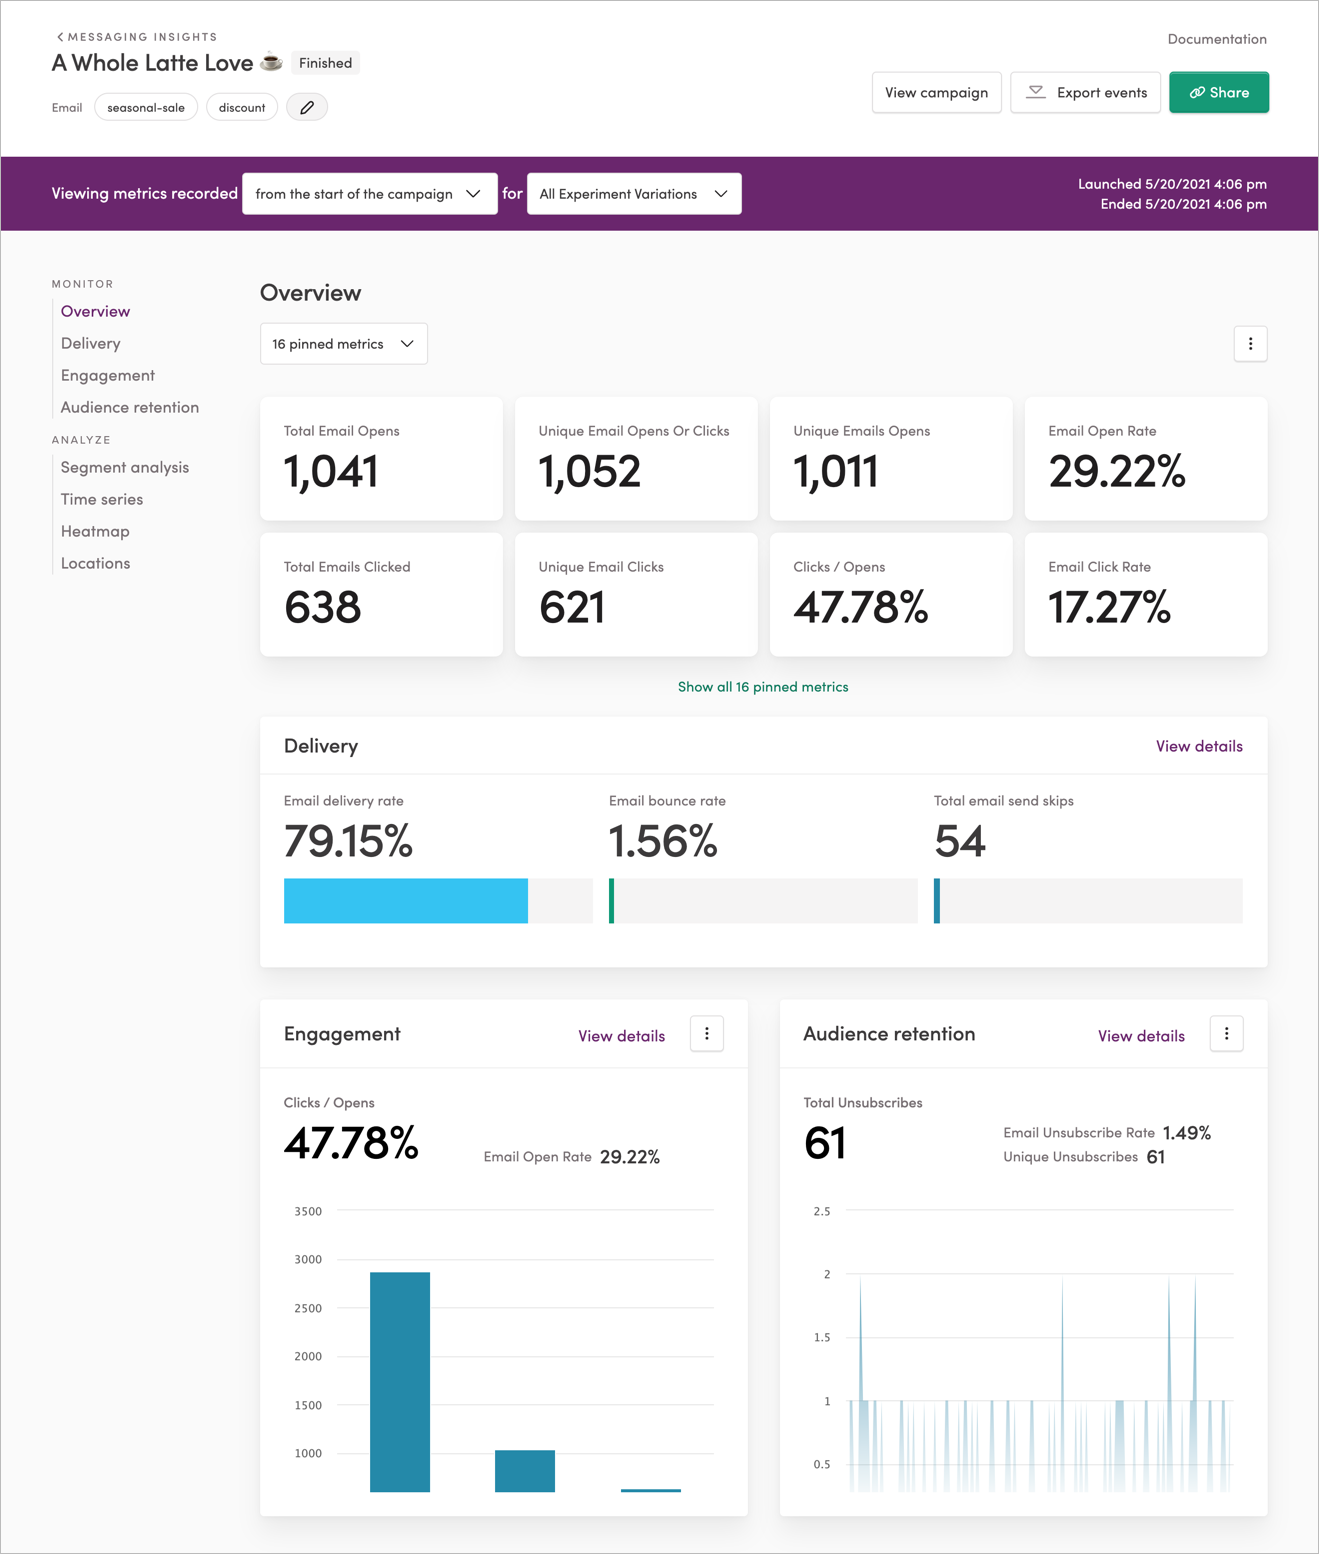 The Campaign Analytics page